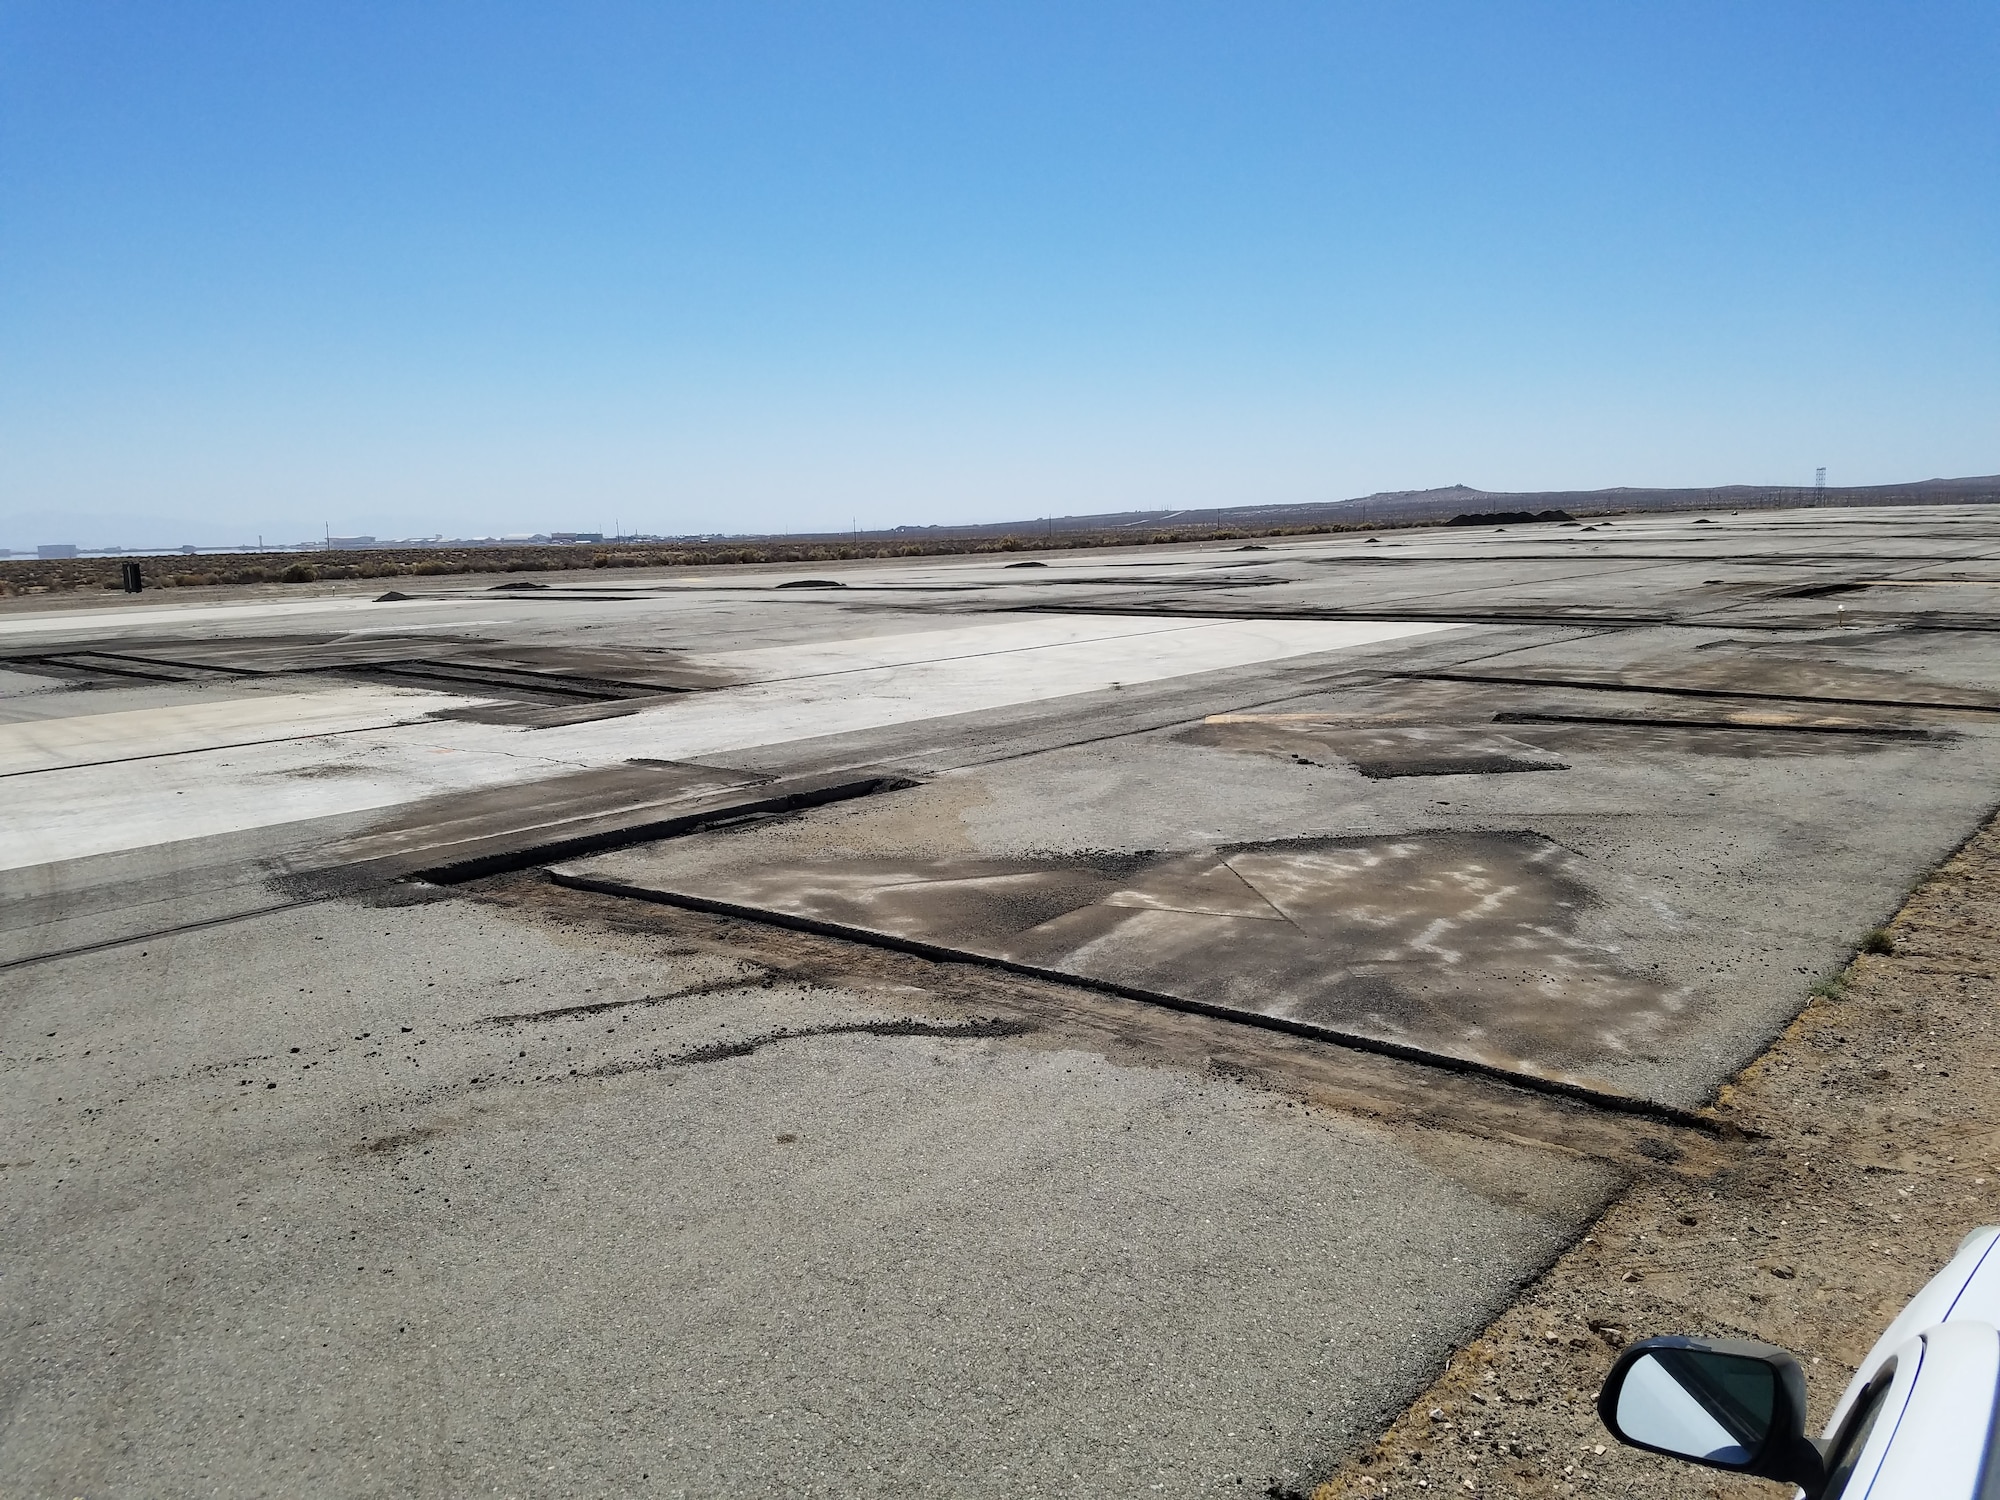 Edwards Air Force Base’s North Base runway under repair in September 2018. (Courtesy photo)